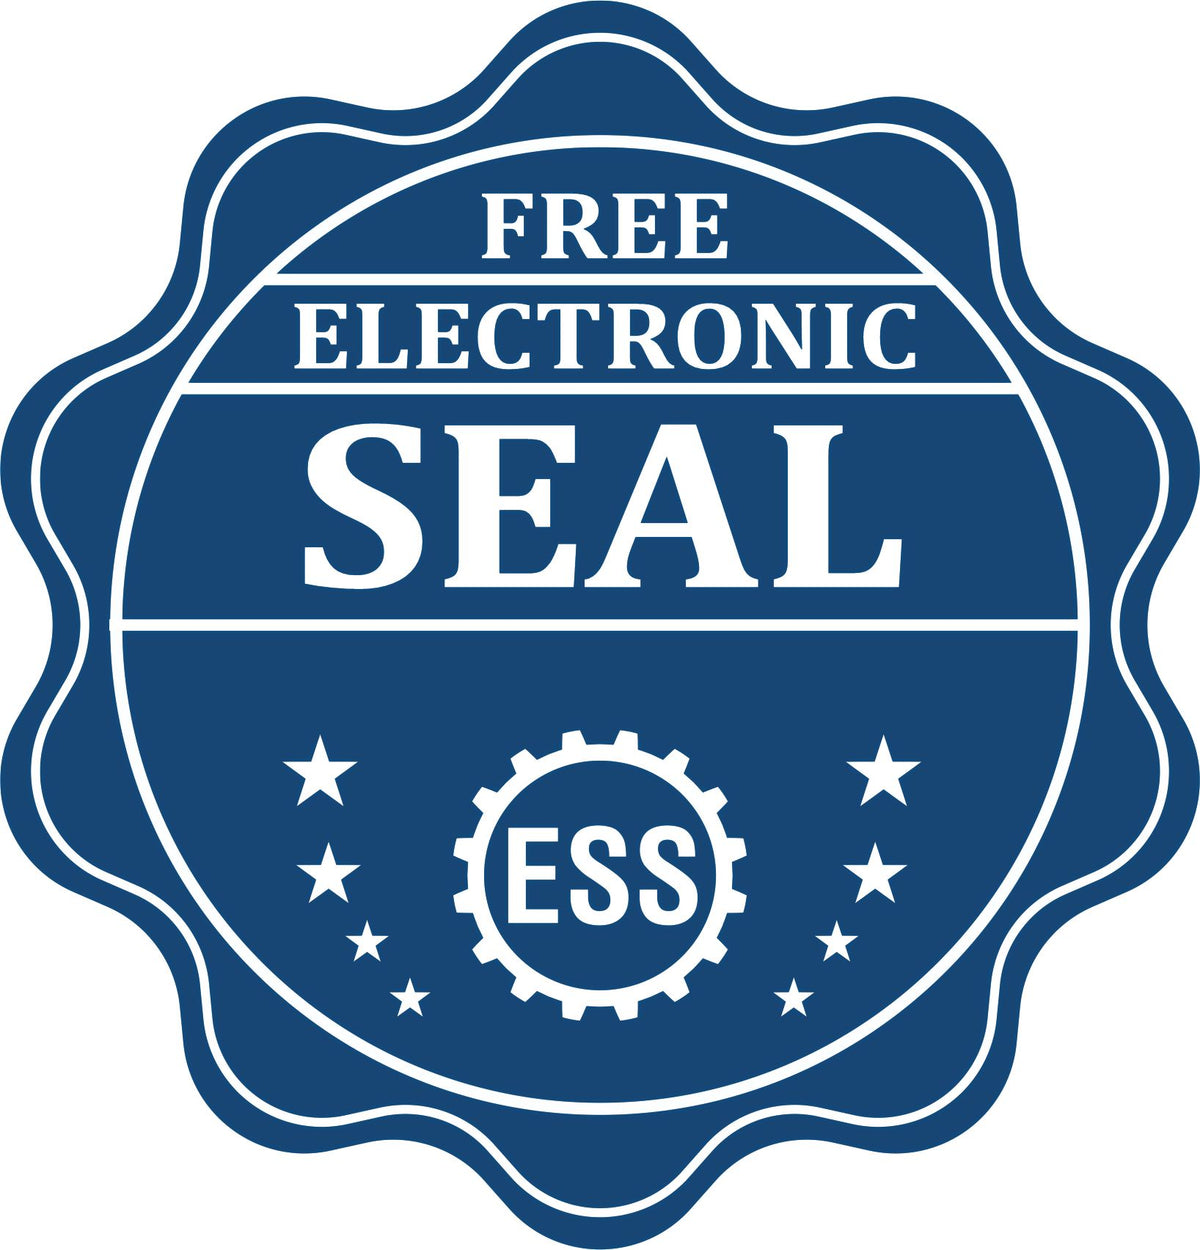 A badge showing a free electronic seal for the Heavy Duty Cast Iron Texas Architect Embosser with stars and the ESS gear on the emblem.